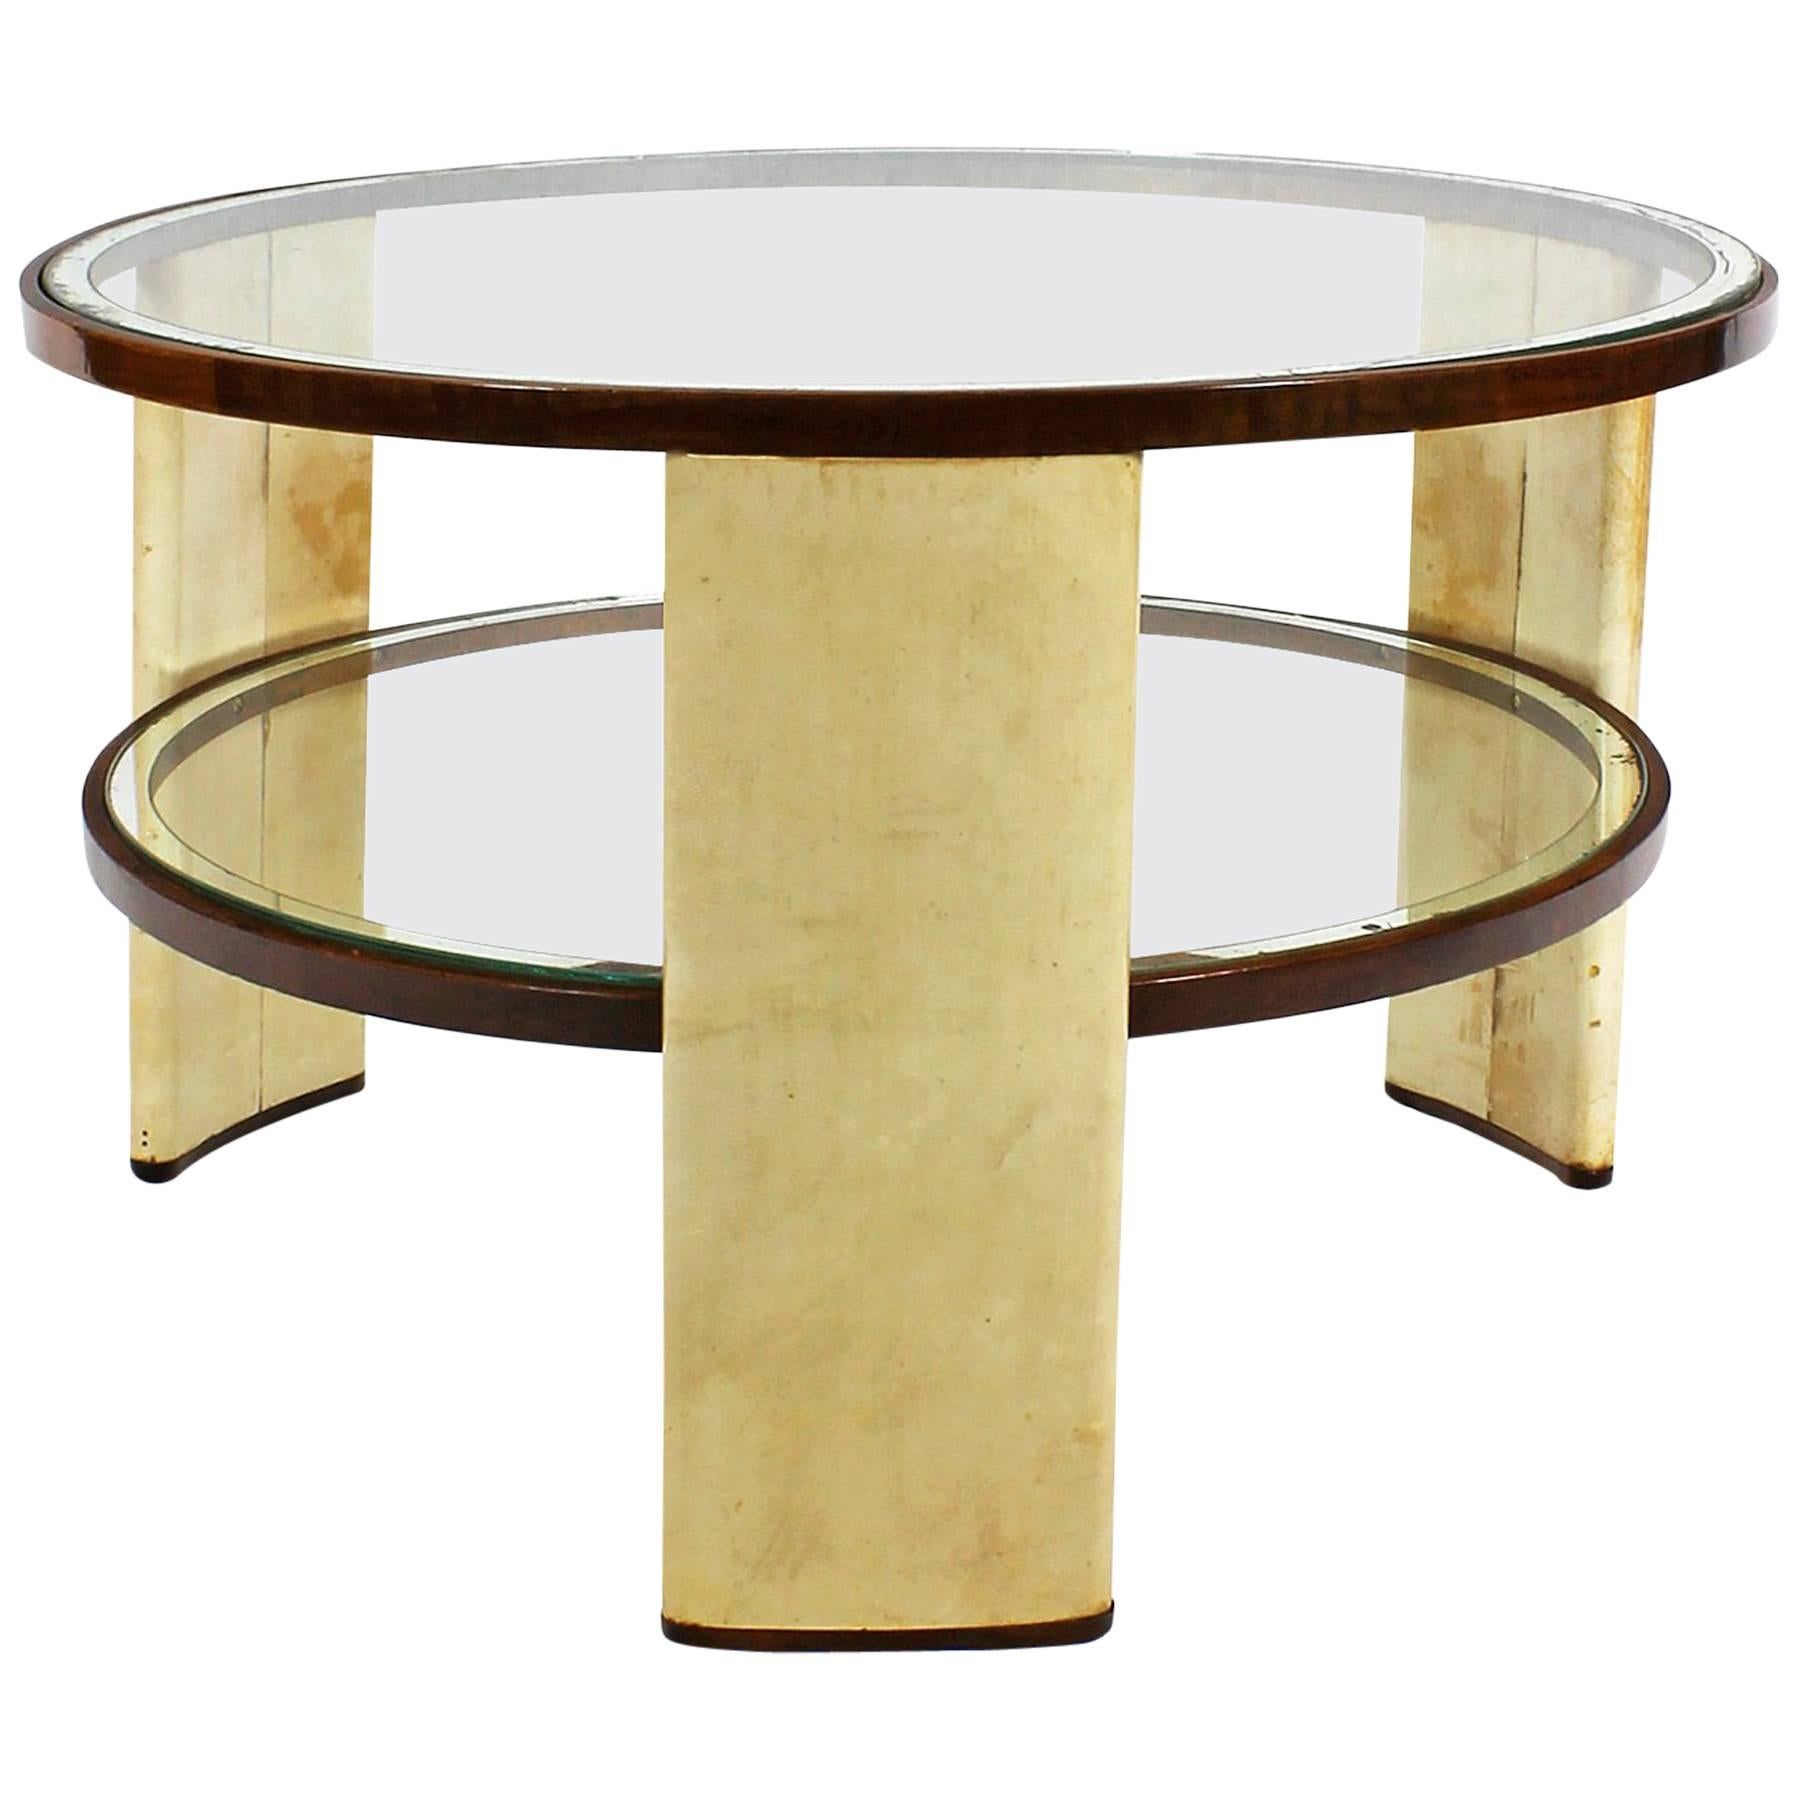 1930s Art Deco Side Table, parchment and walnut, mirrored glass. Italy